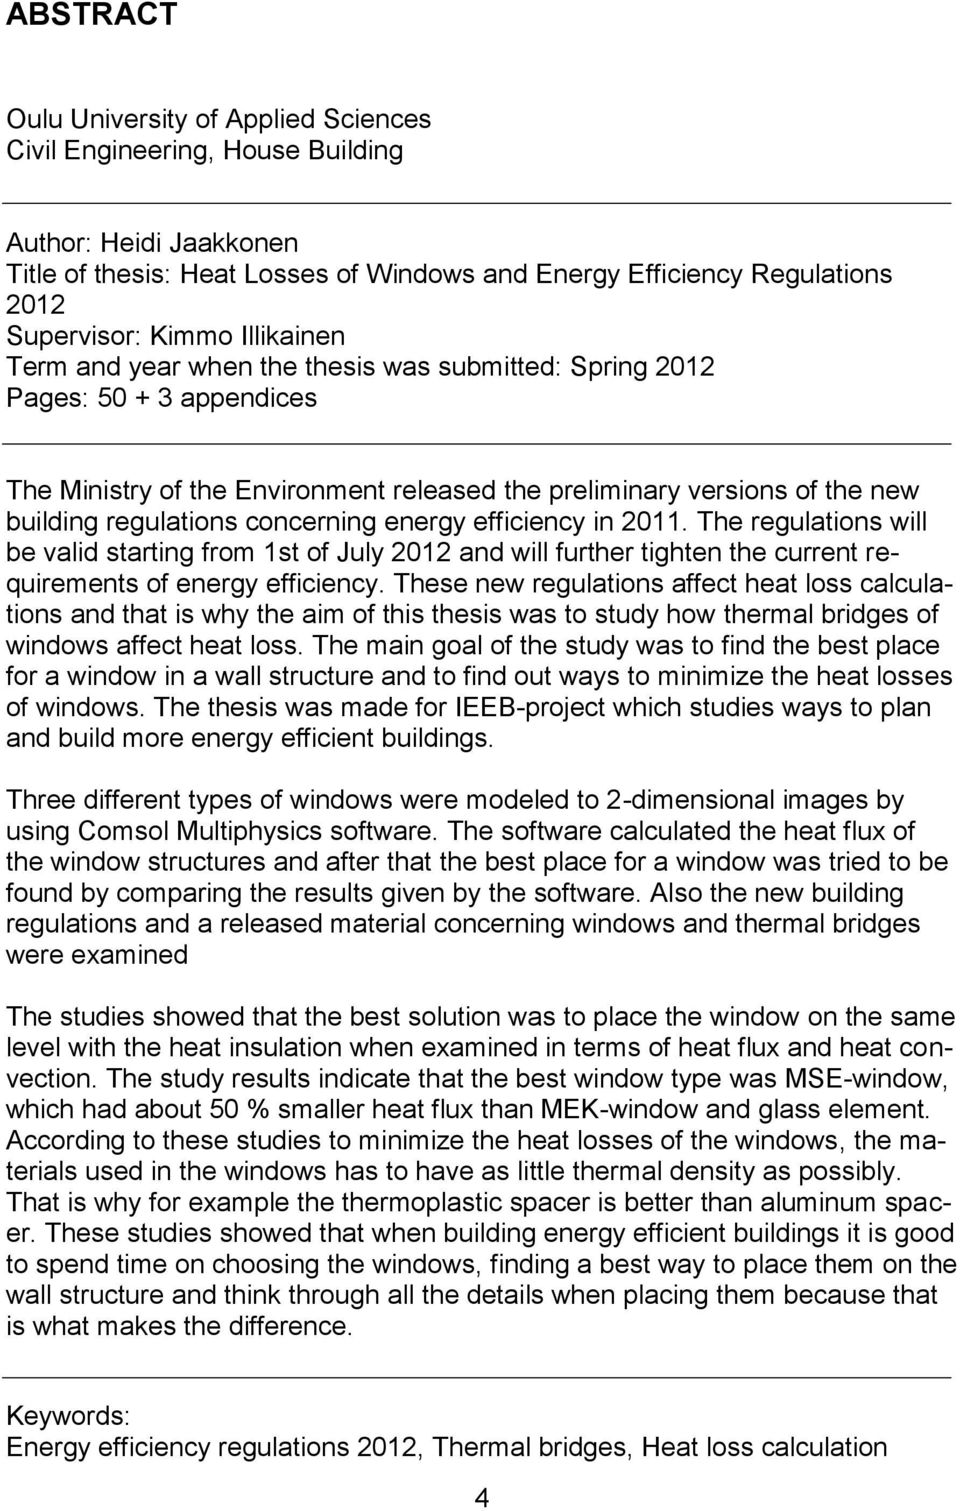 concerning energy efficiency in 2011. The regulations will be valid starting from 1st of July 2012 and will further tighten the current requirements of energy efficiency.